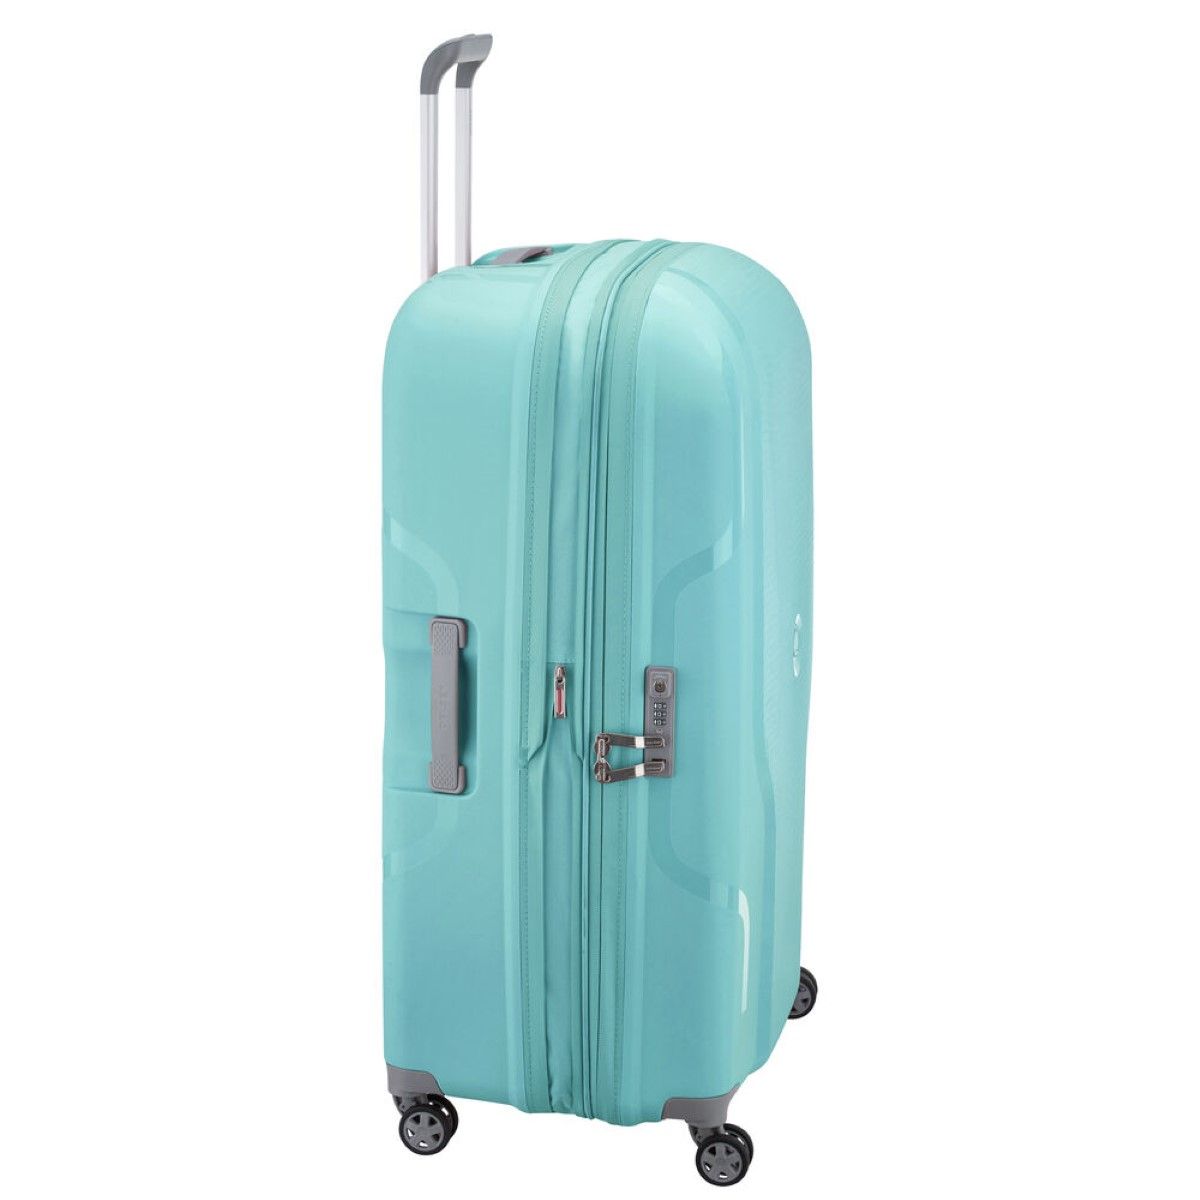 Expandable X-Large Trolley Clavel 83 cm Delsey, extra spacious hardcase trolley with four spinning wheels, zipped compartment, TSA combination lock, side handles, and telescopic double tube handle.